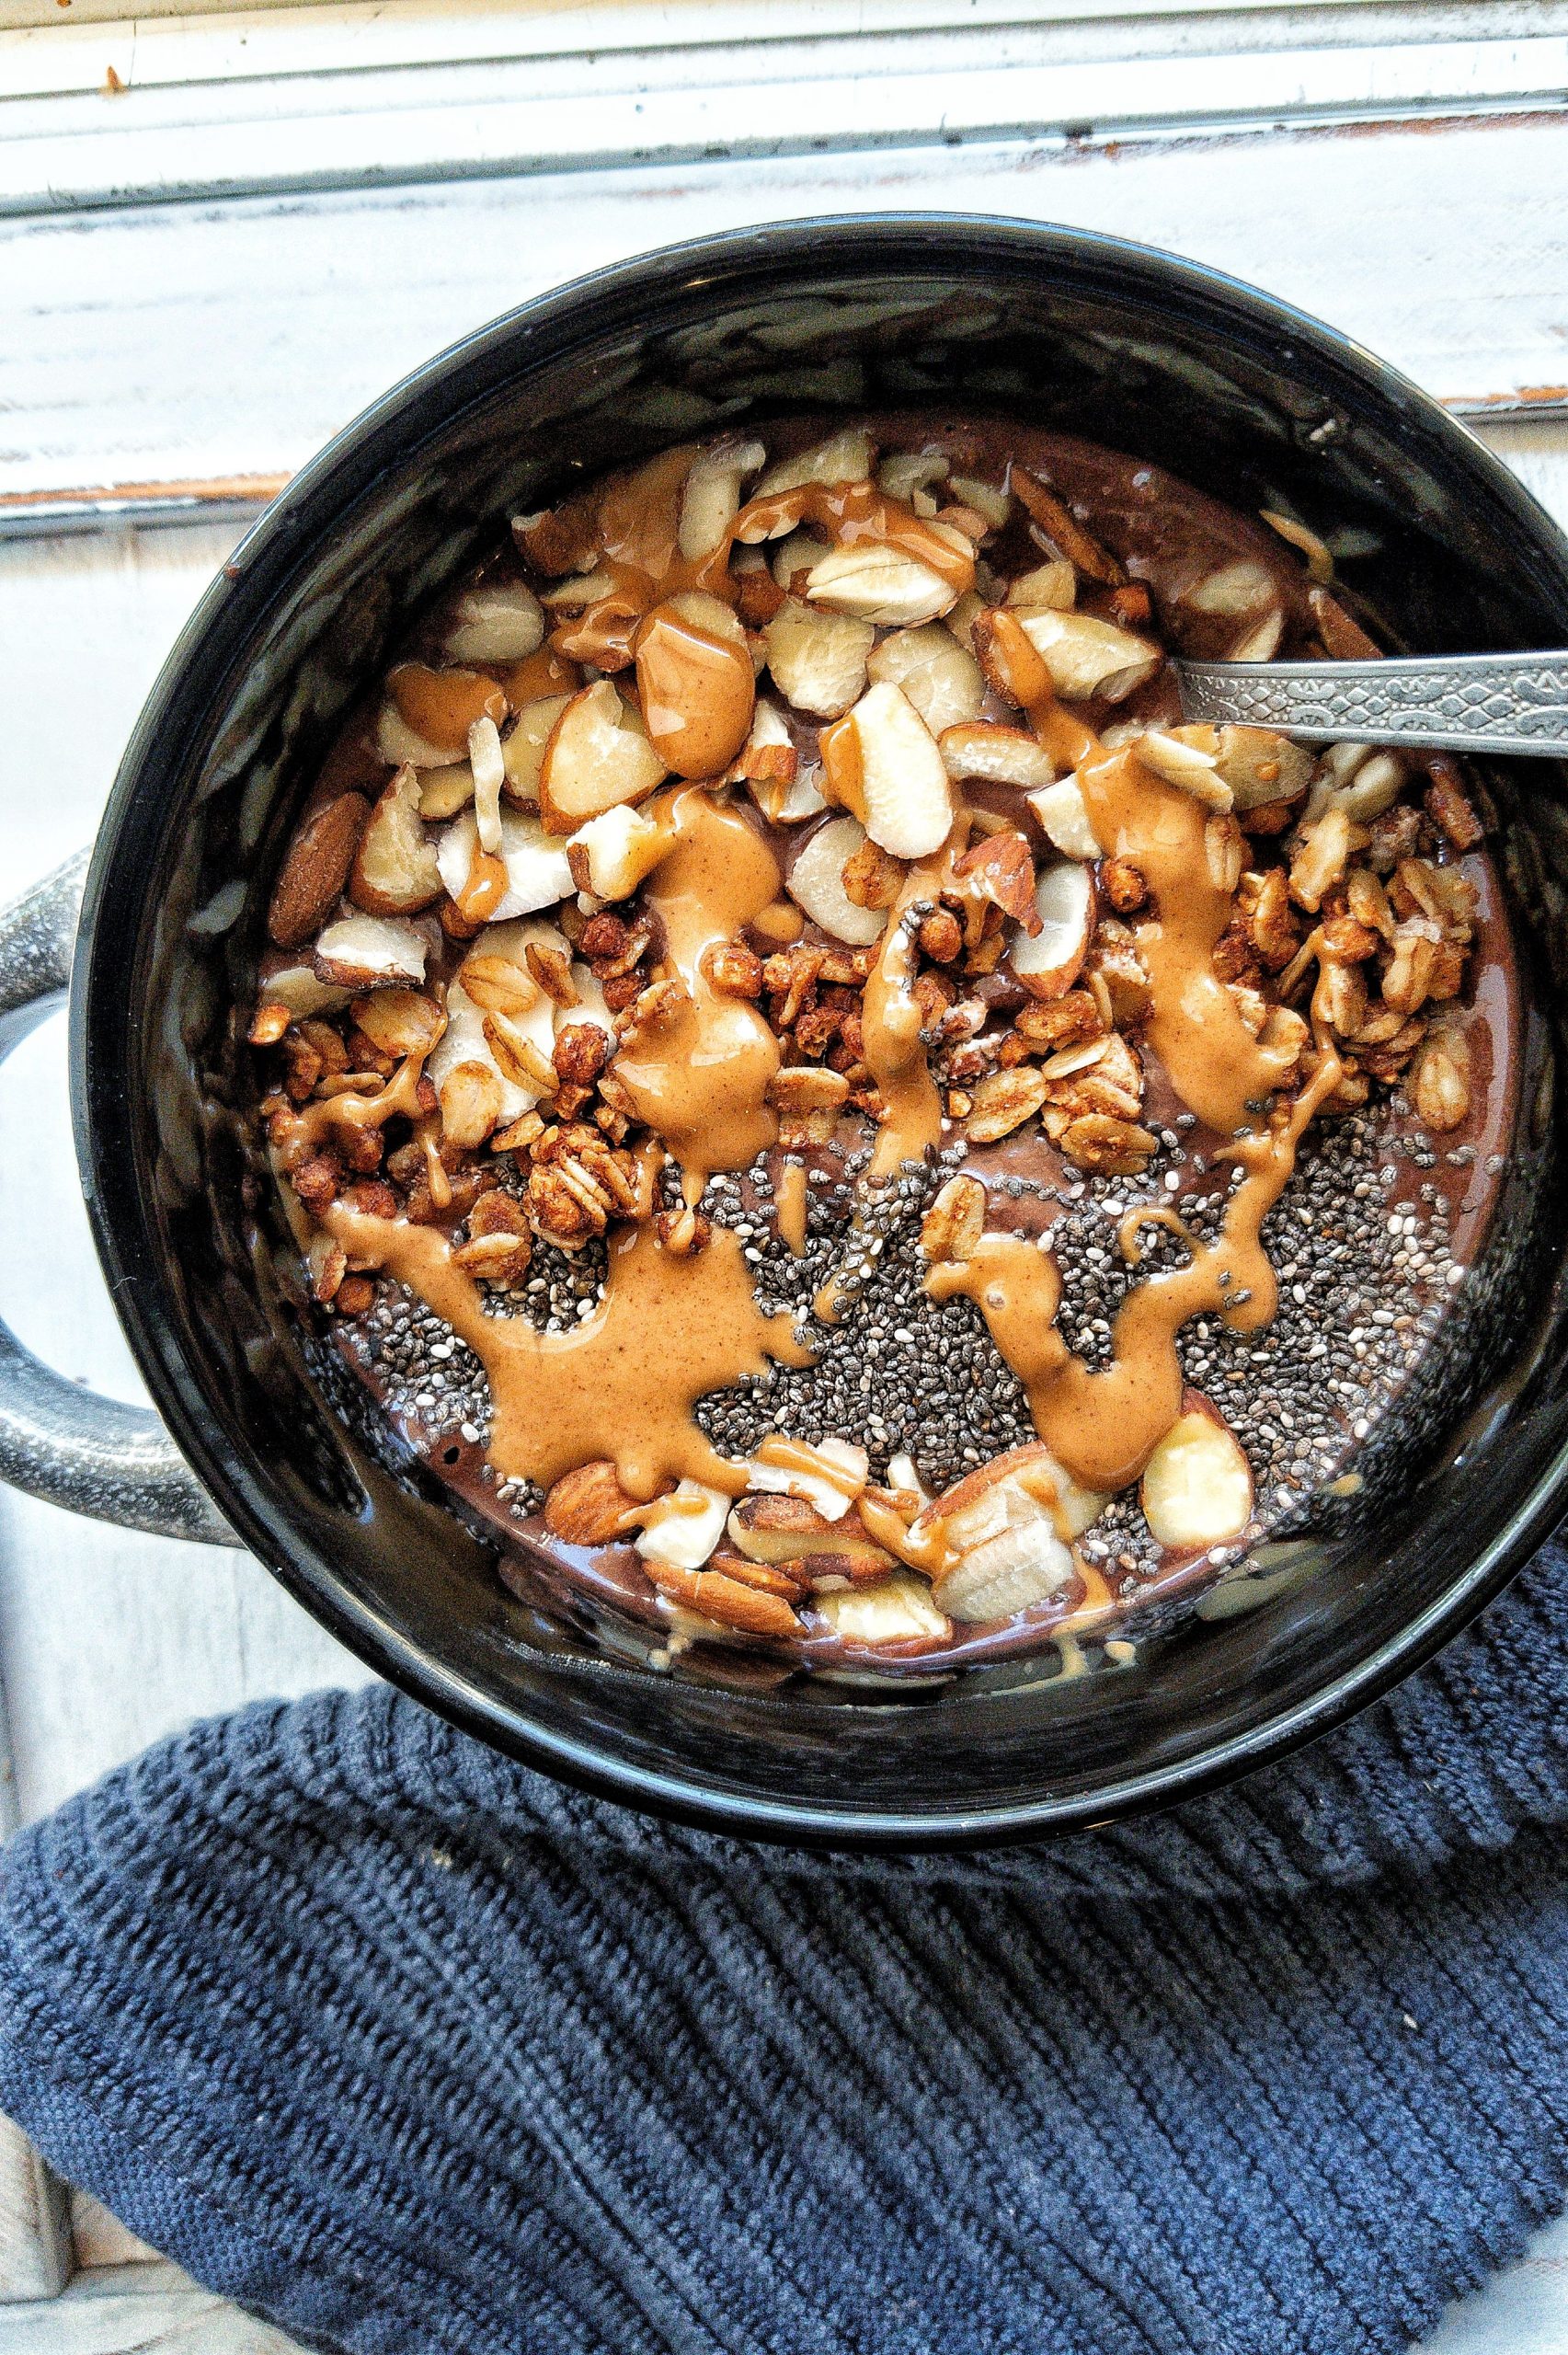 A chocolate banana smoothie bowl topped with peanut butter, chia seeds, sliced almonds, and granola